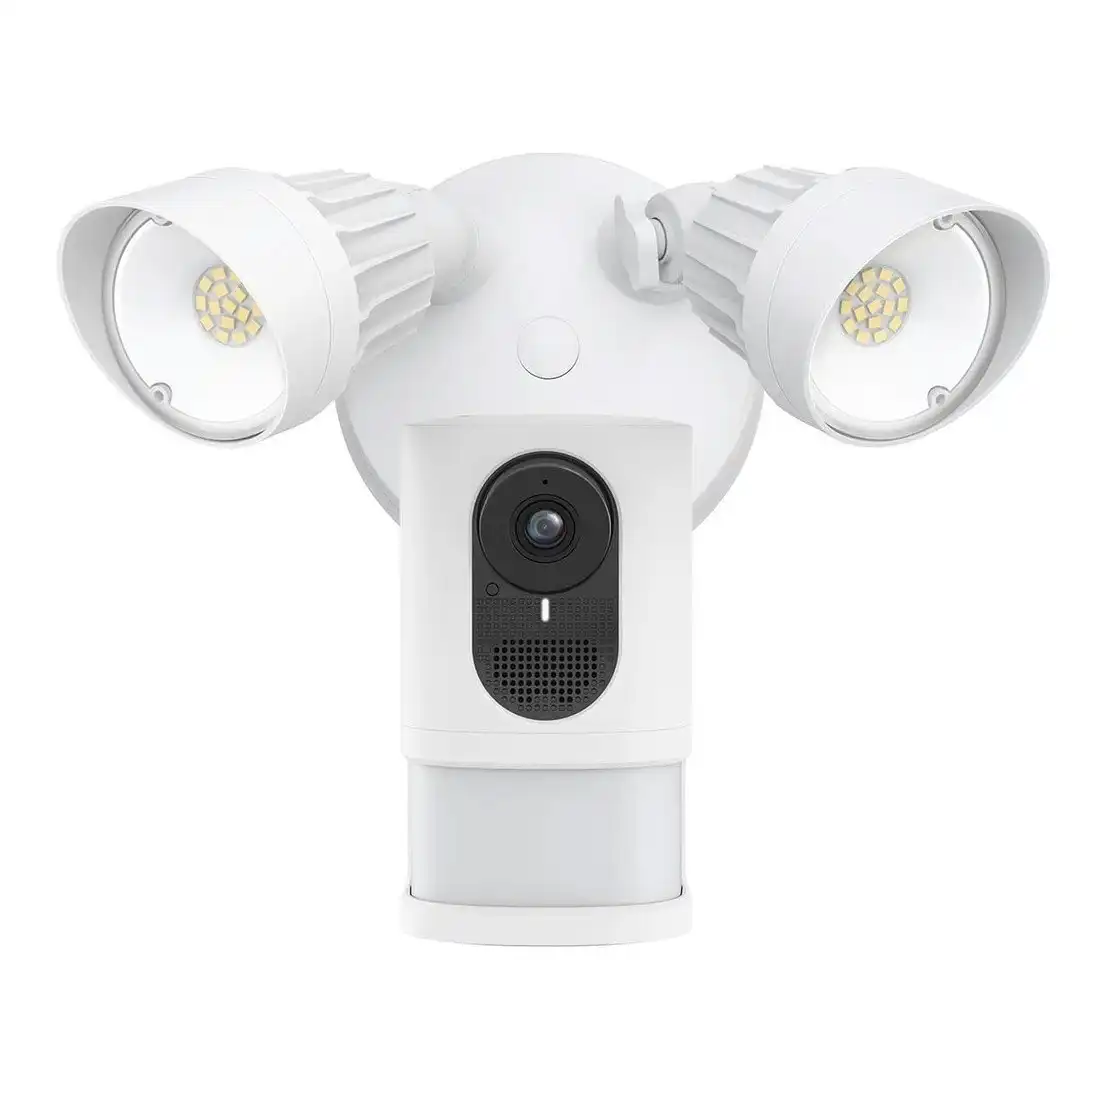 Eufy Security Floodlight Camera 2K T8422T21(Wired) - White